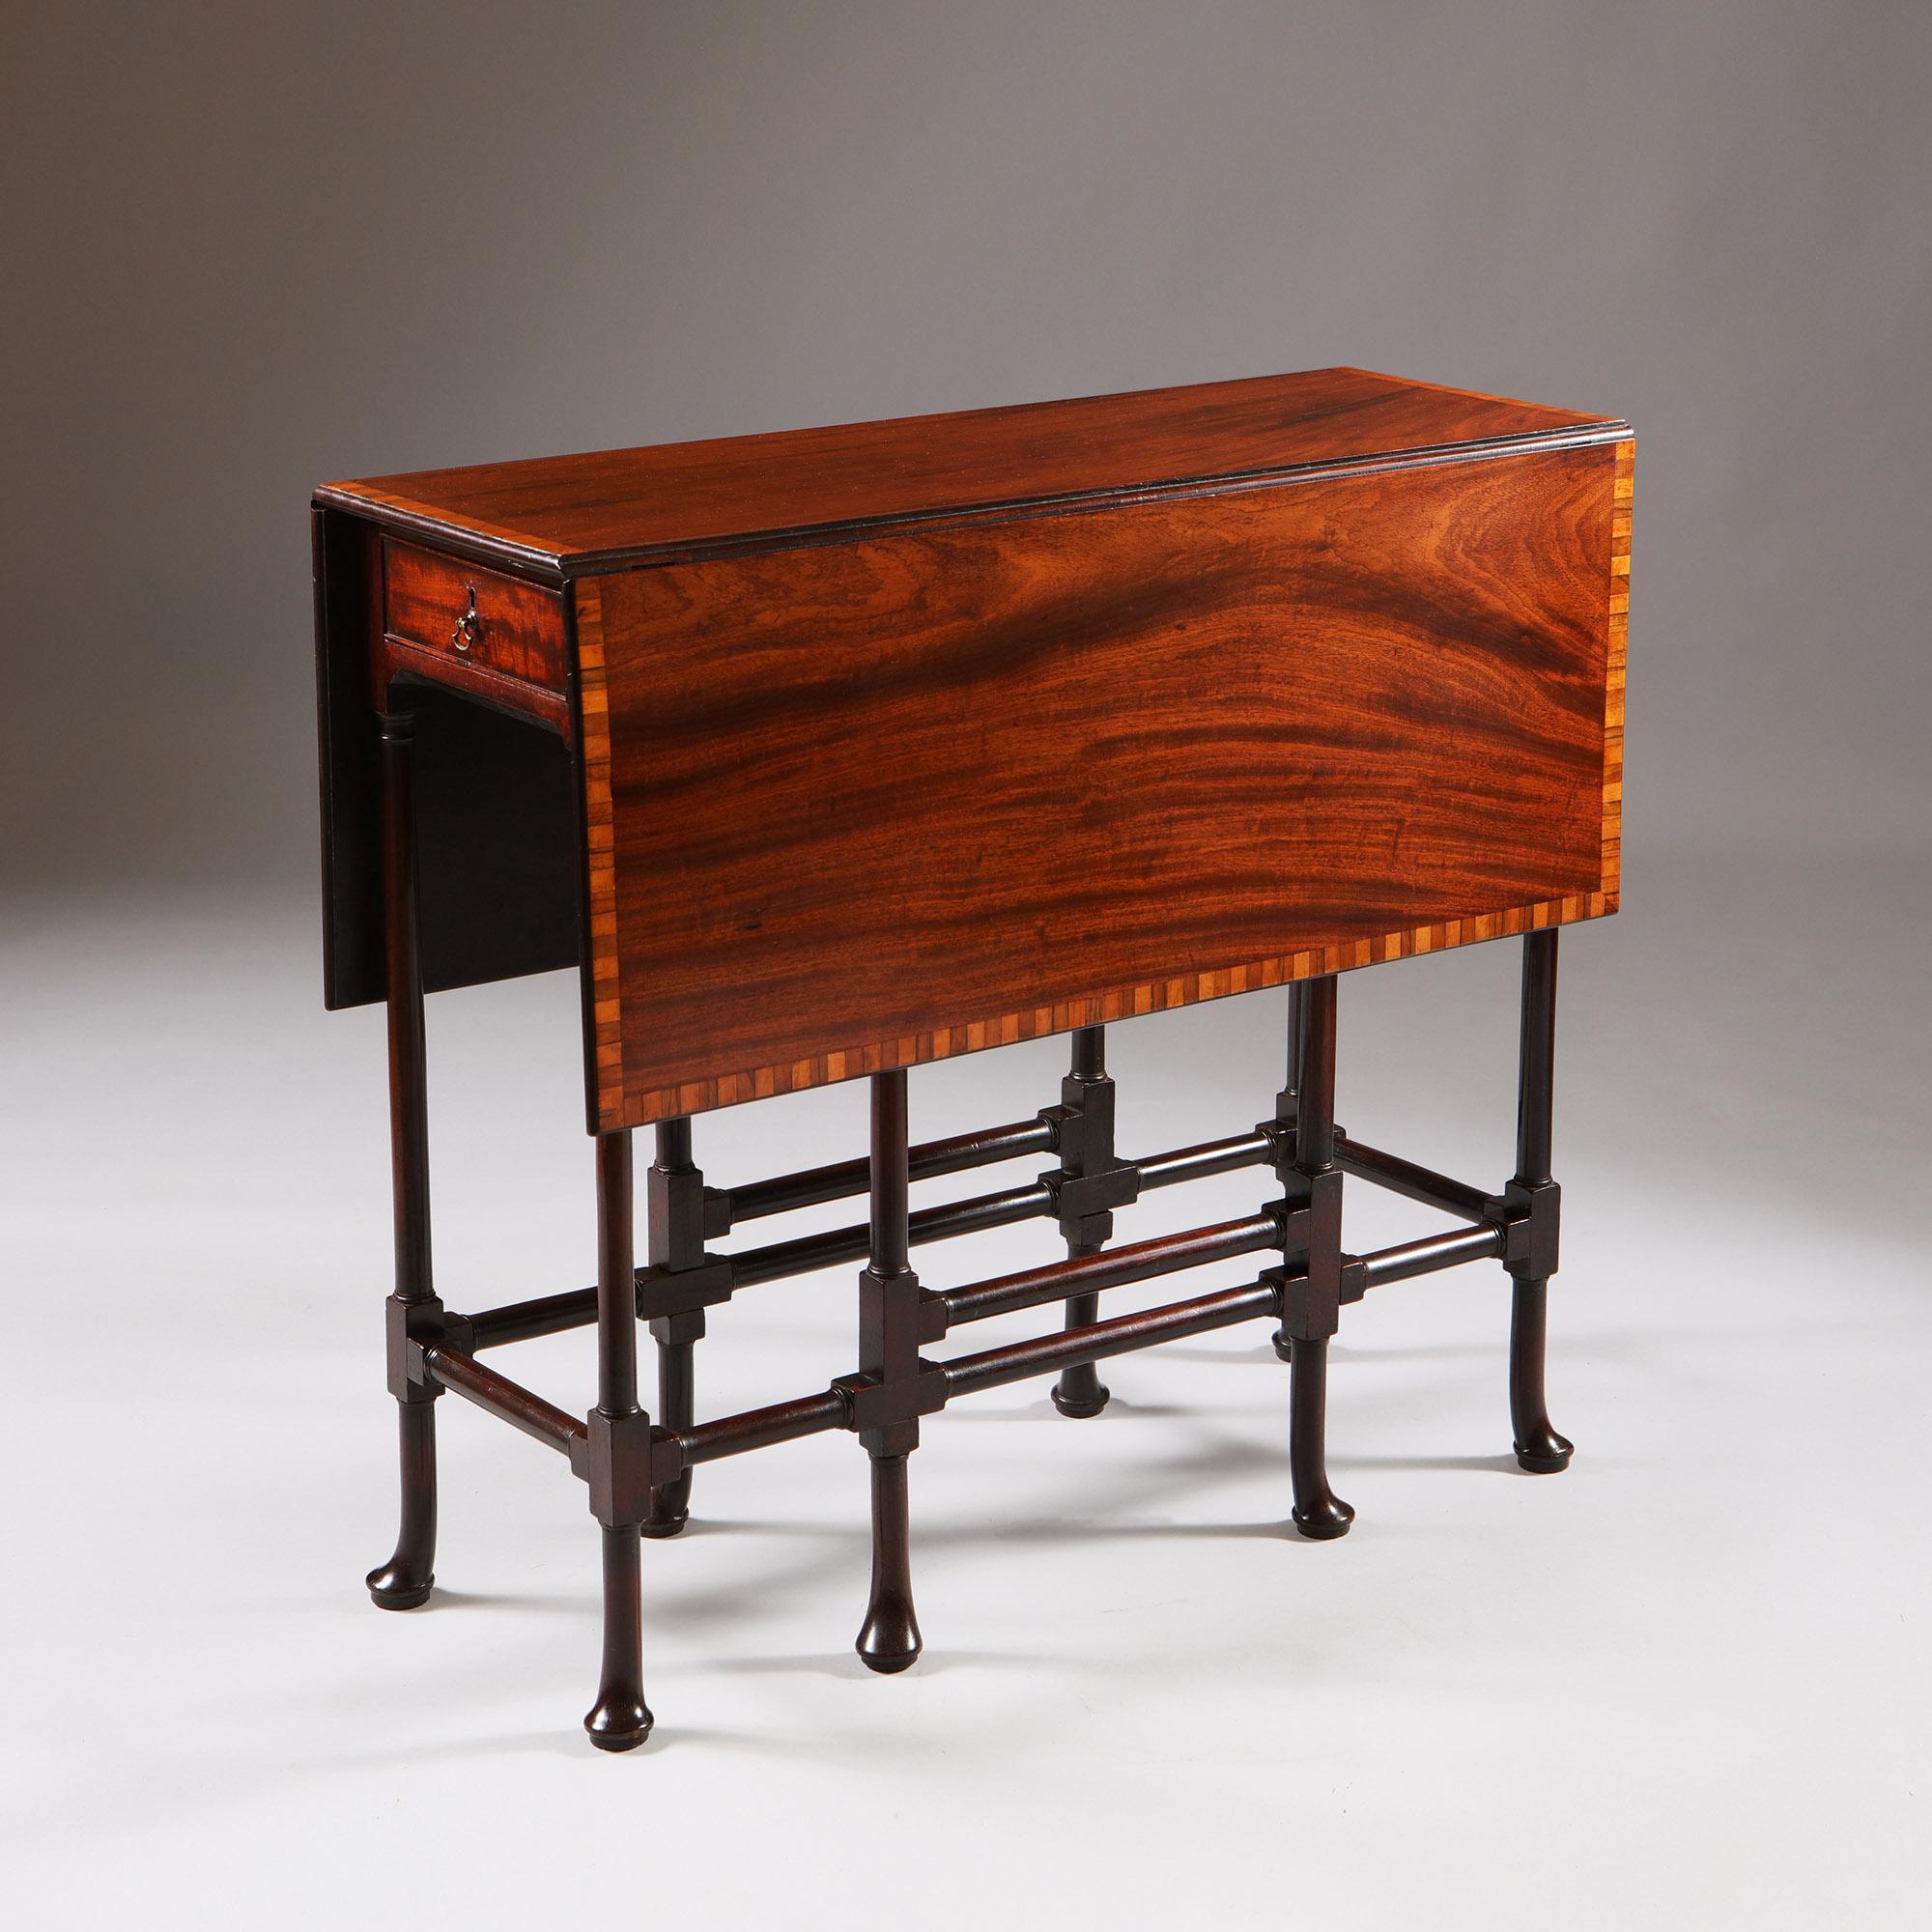 George III mahogany spider-leg table attributed to Thomas Chippendale 1768 1